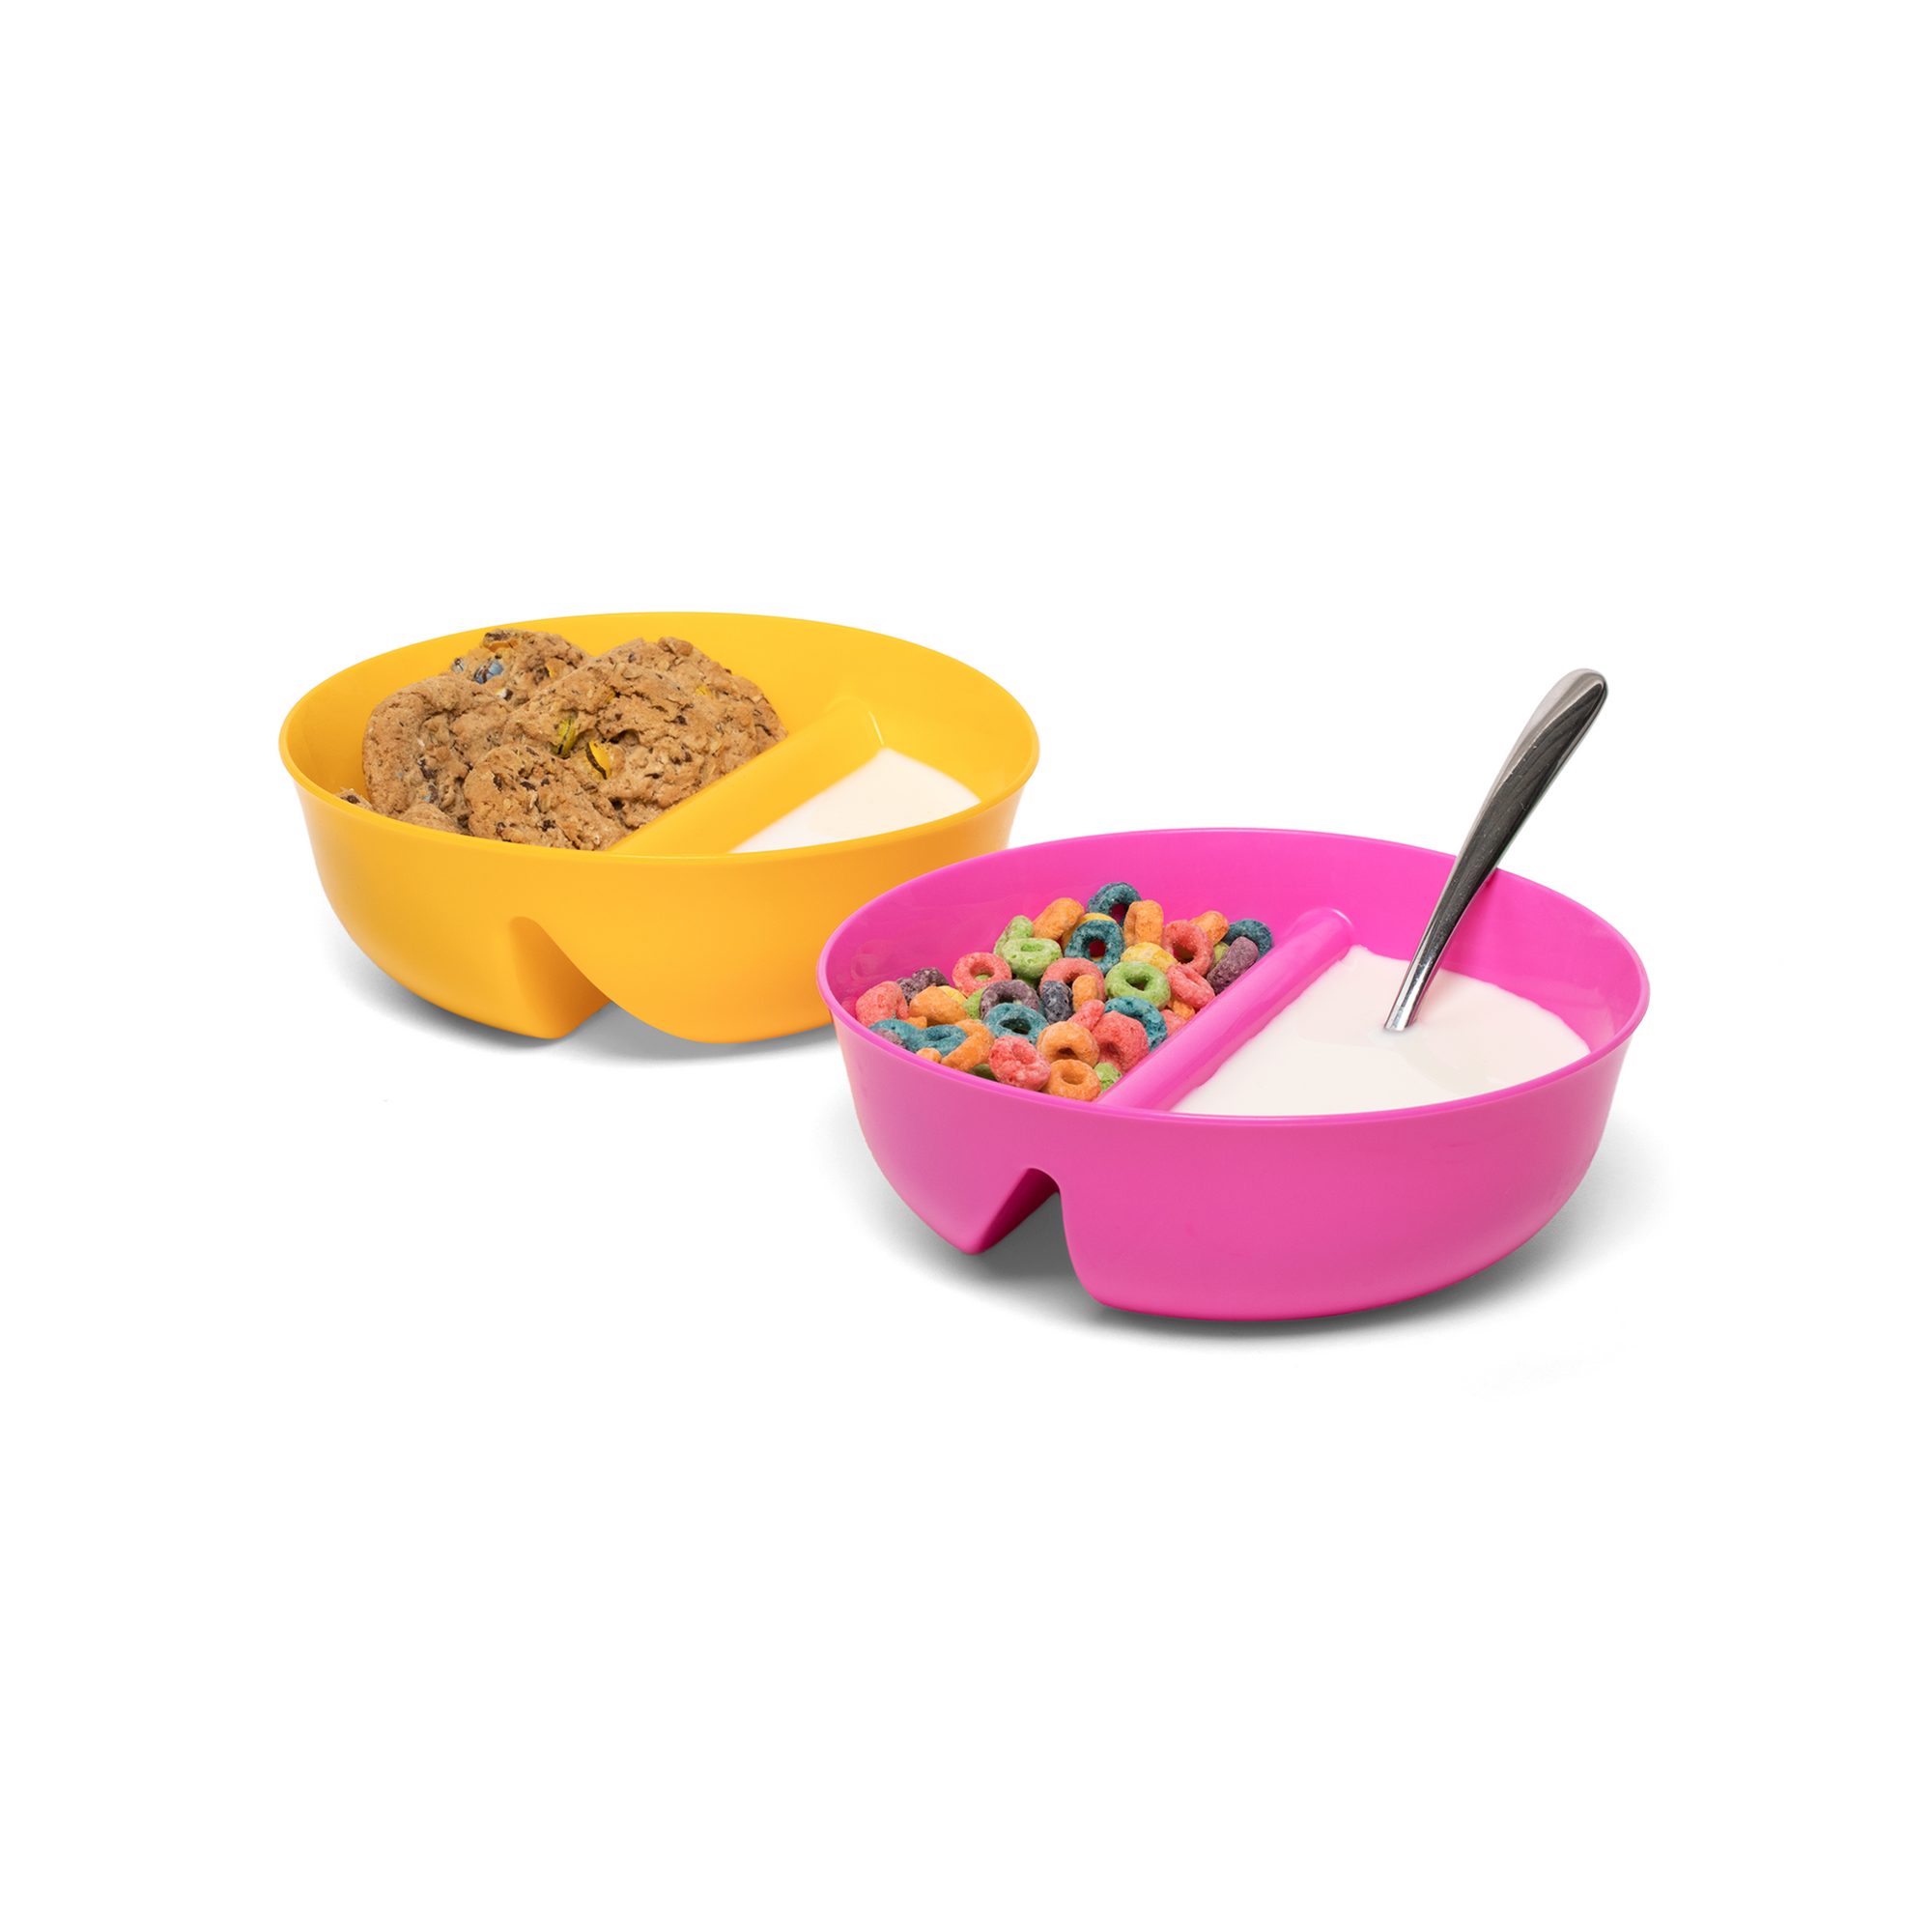  Cereal On The Go, Cup Container Breakfast Drink Milk